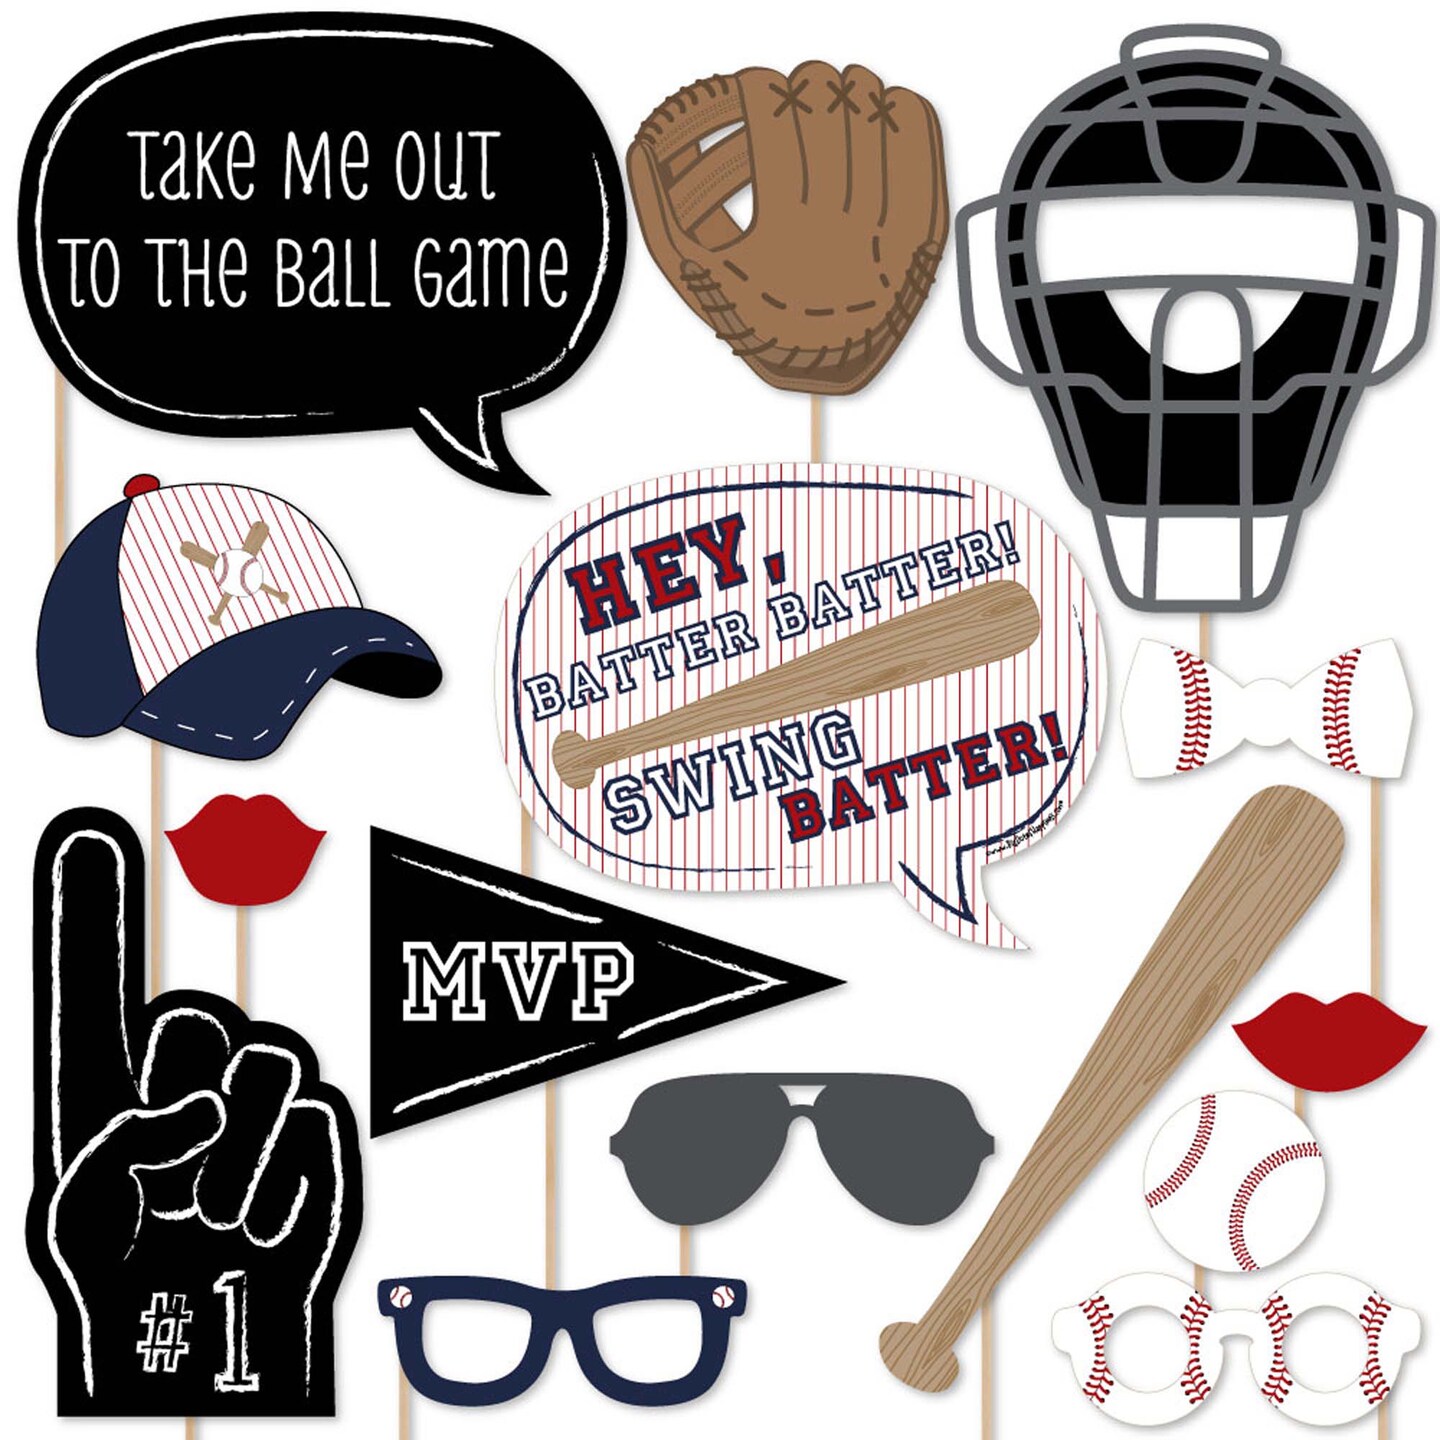 Big Dot of Happiness Batter Up - Baseball Photo Booth Props Kit - 20 Count